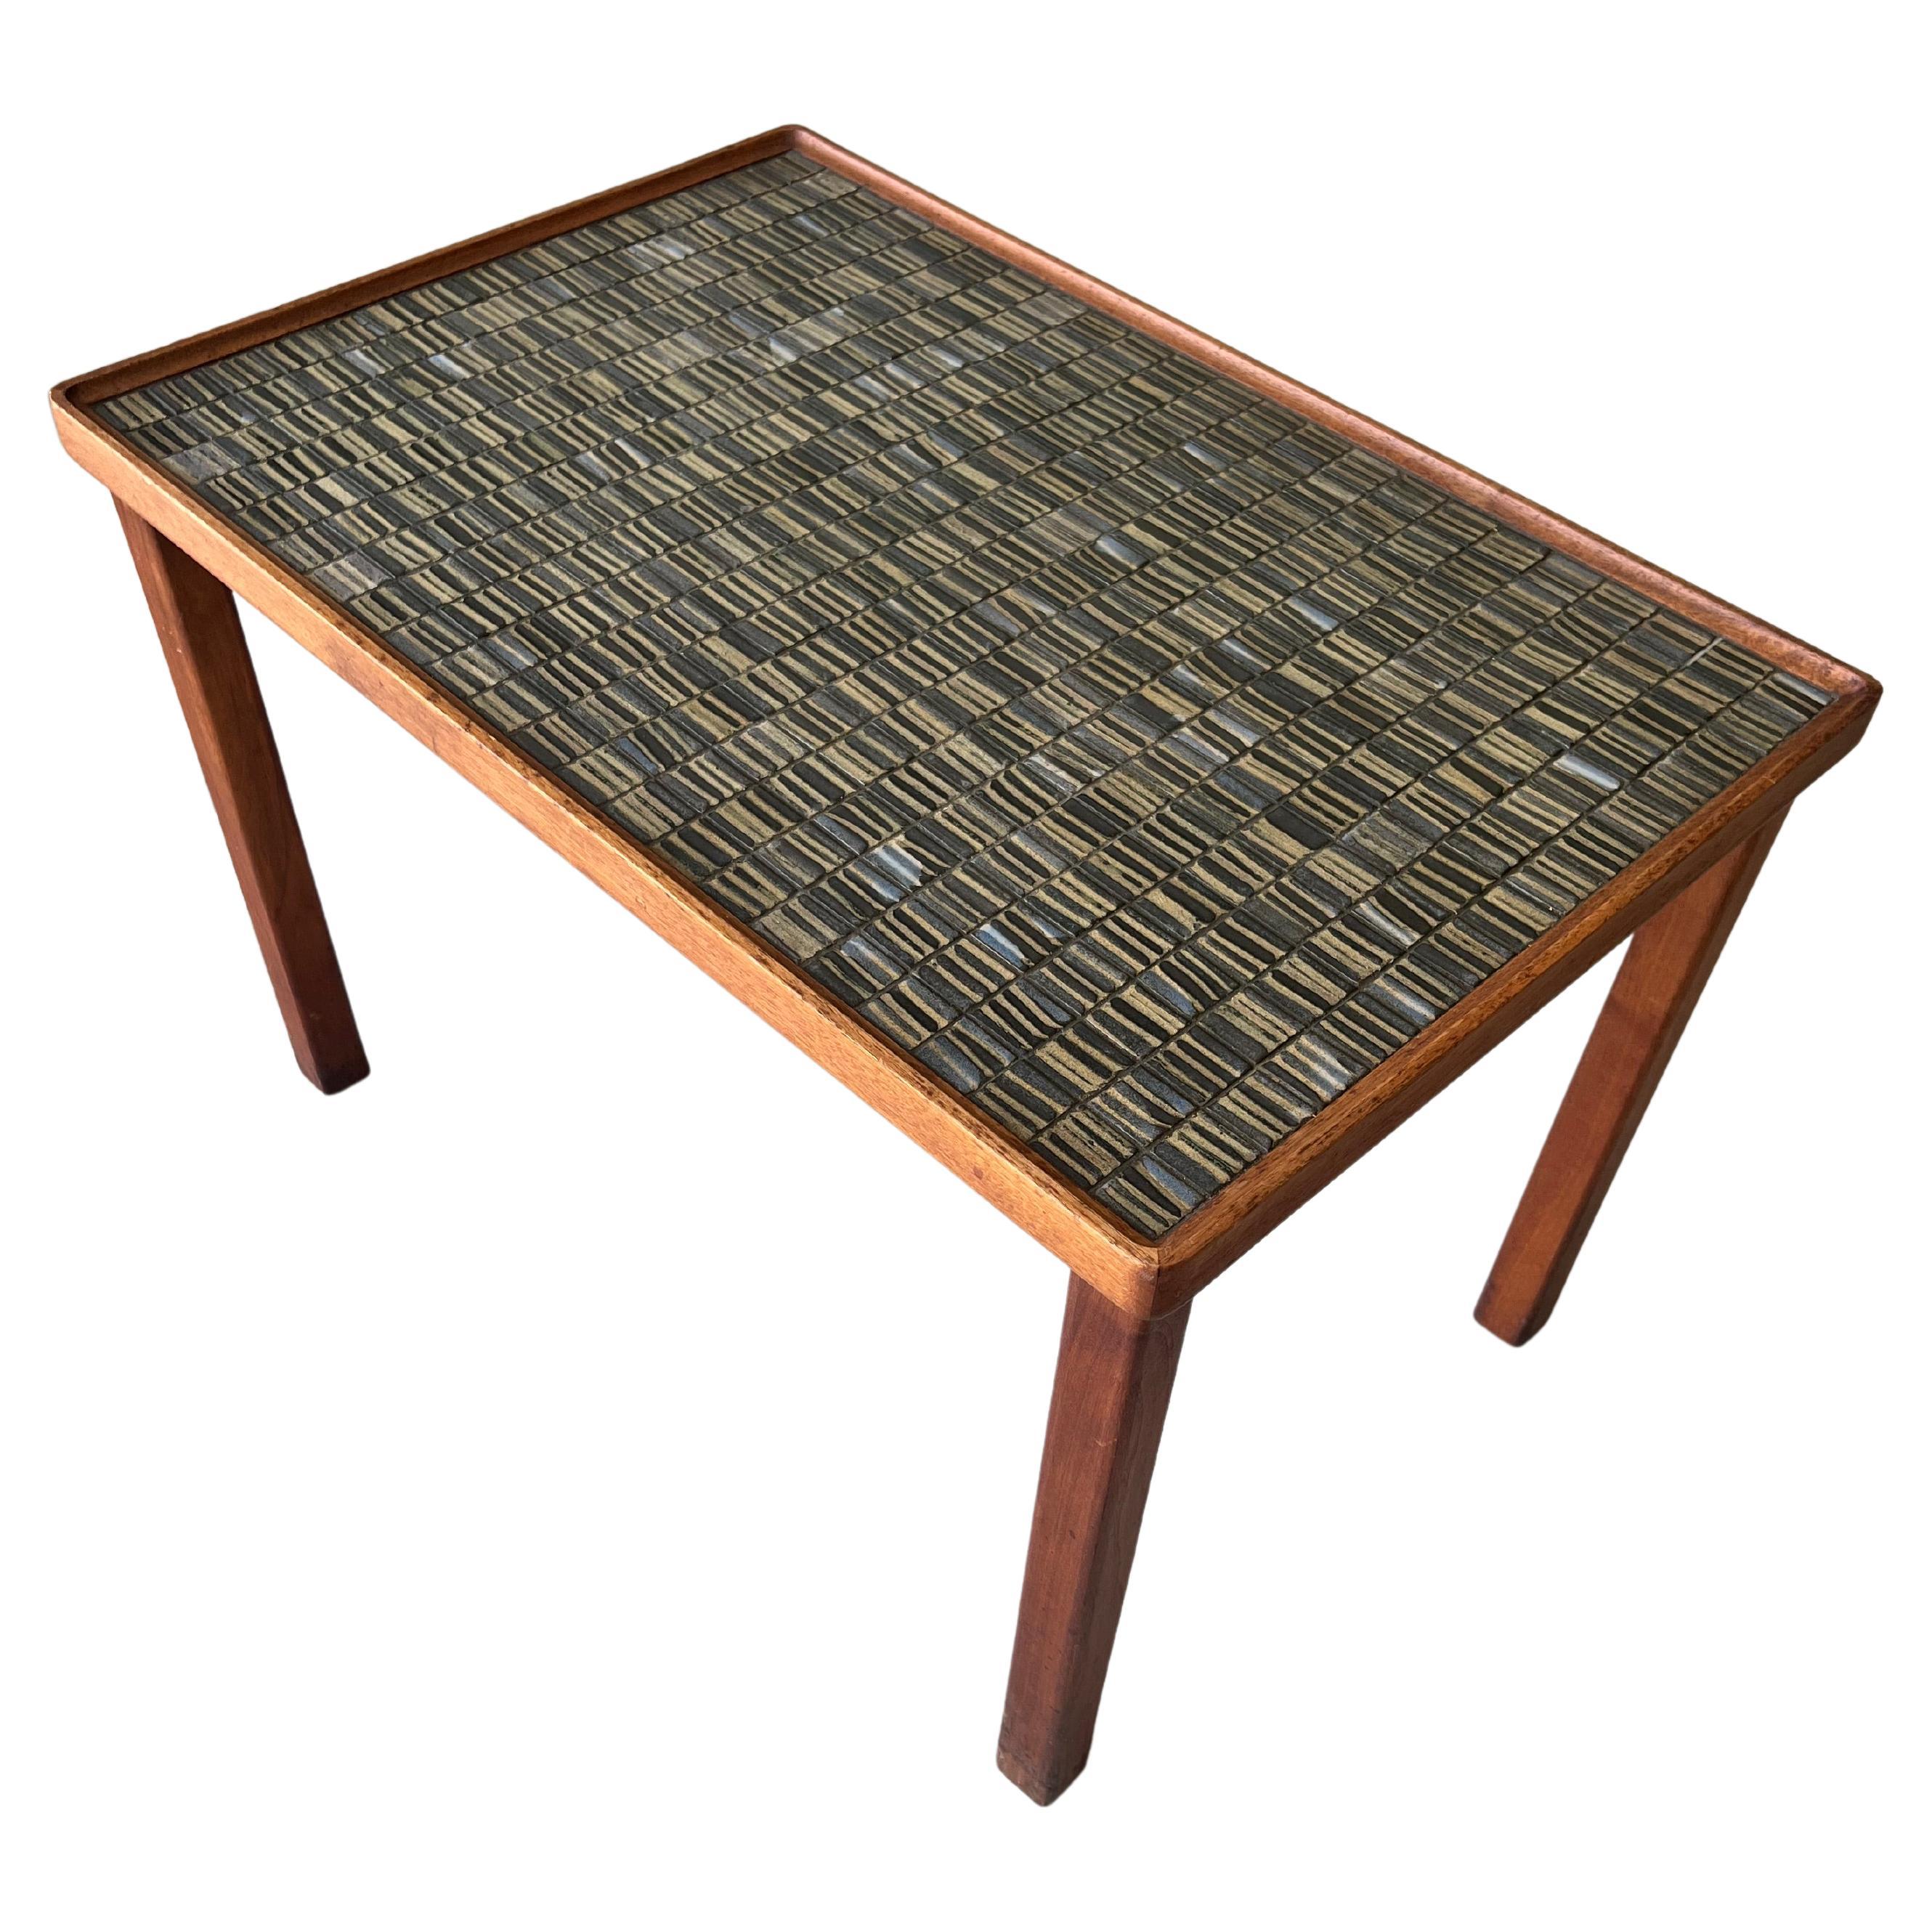 Jane and Gordon Martz Tile and Walnut Occasional Table